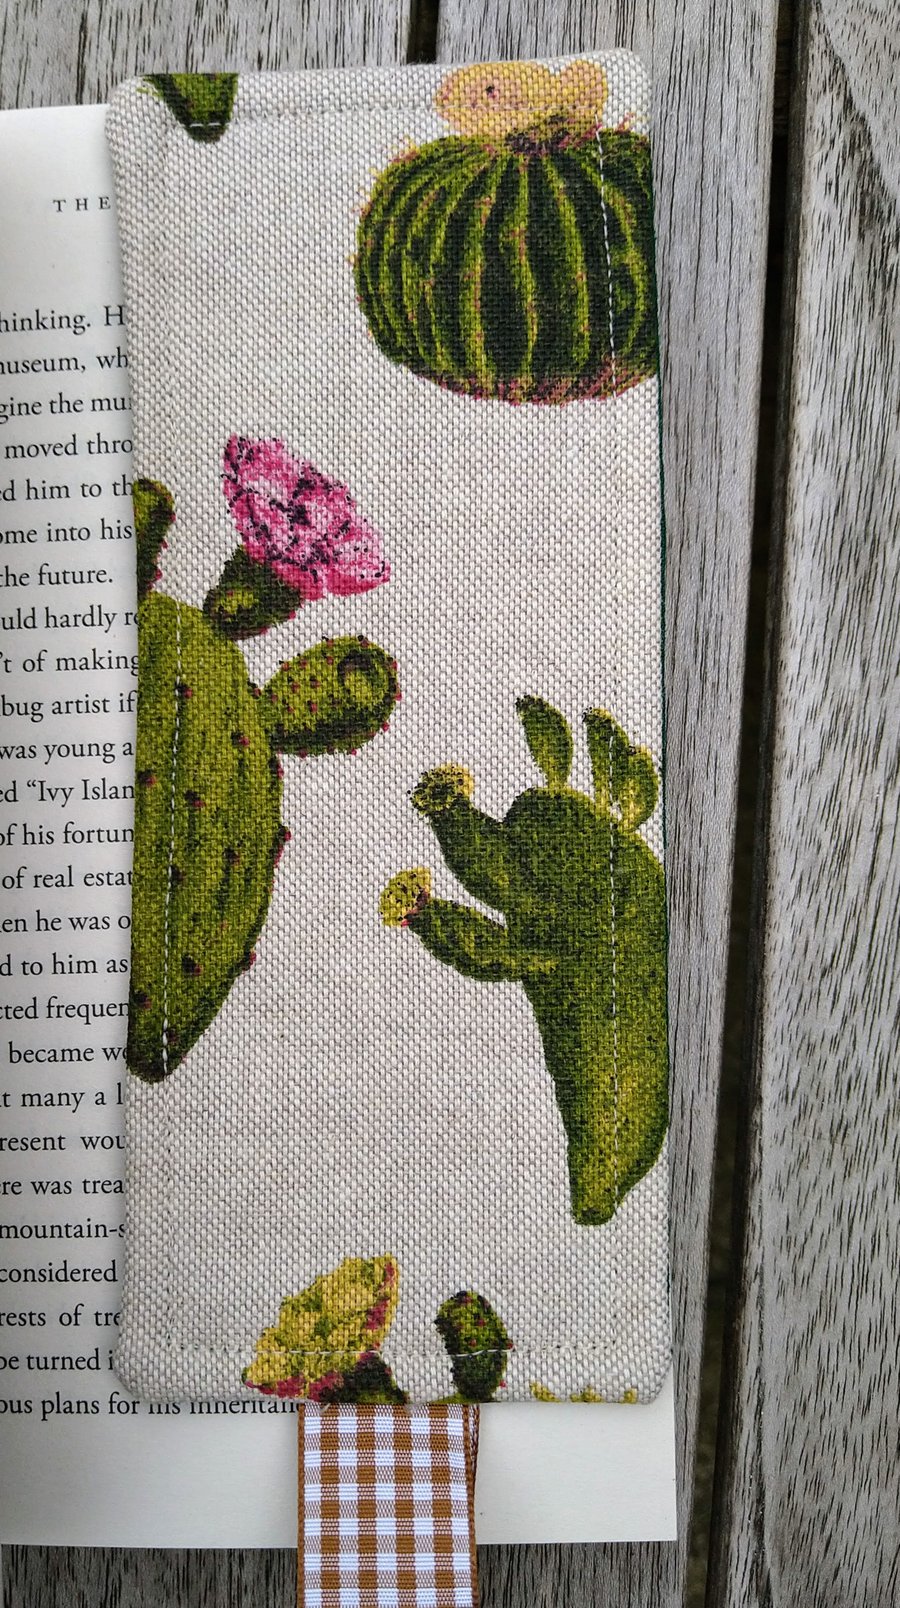 Bookmark with cacti